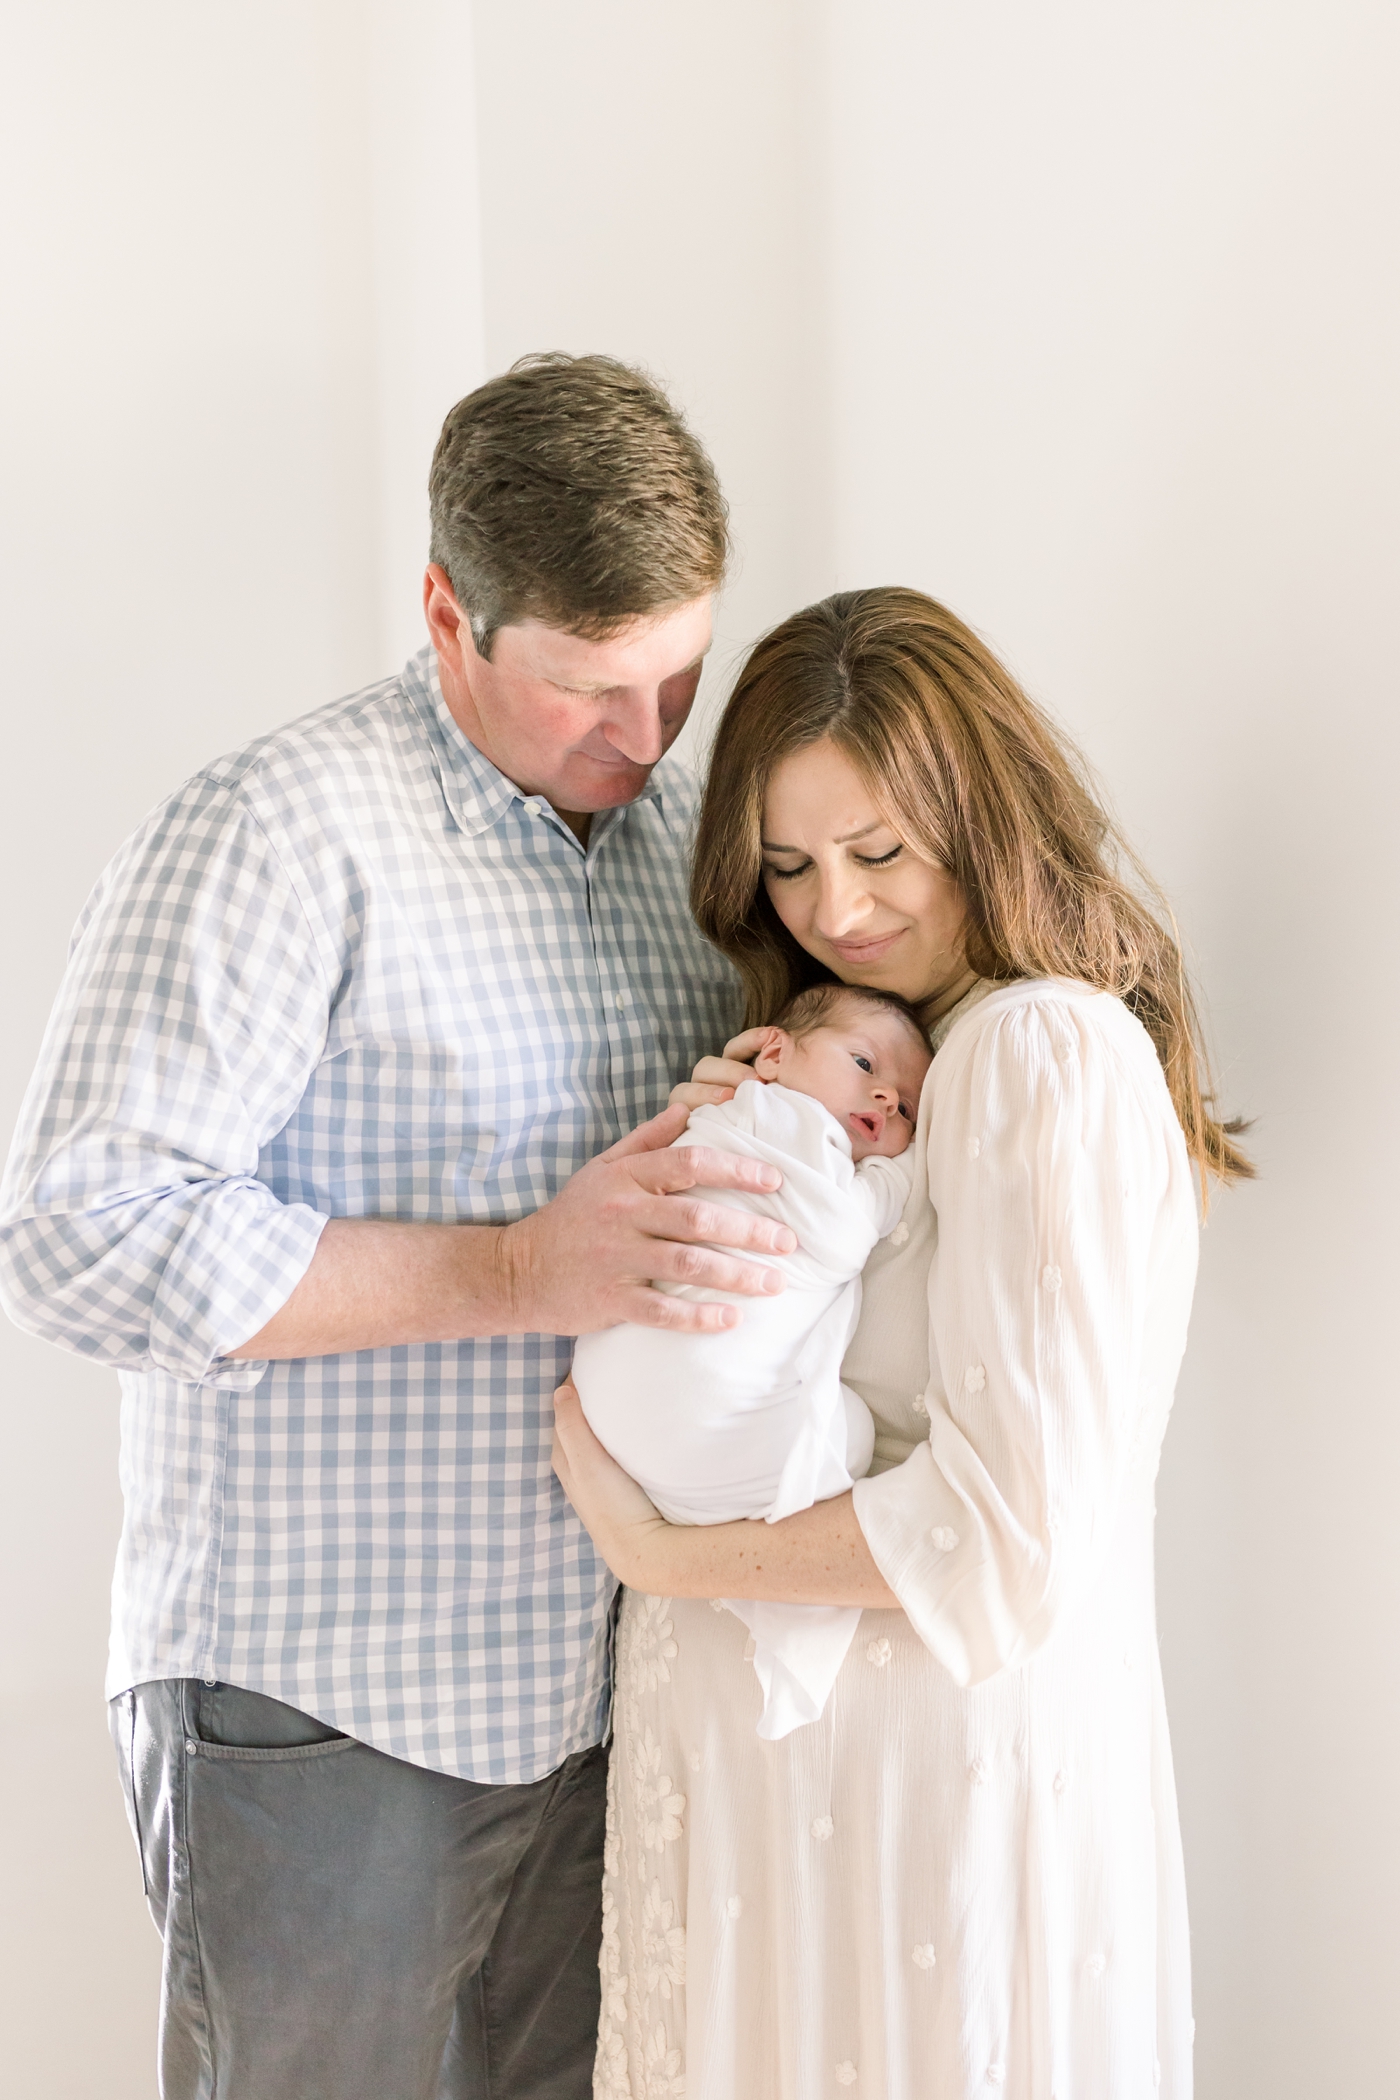 Mom and dad holding their new baby | Photo by Caitlyn Motycka Photography.